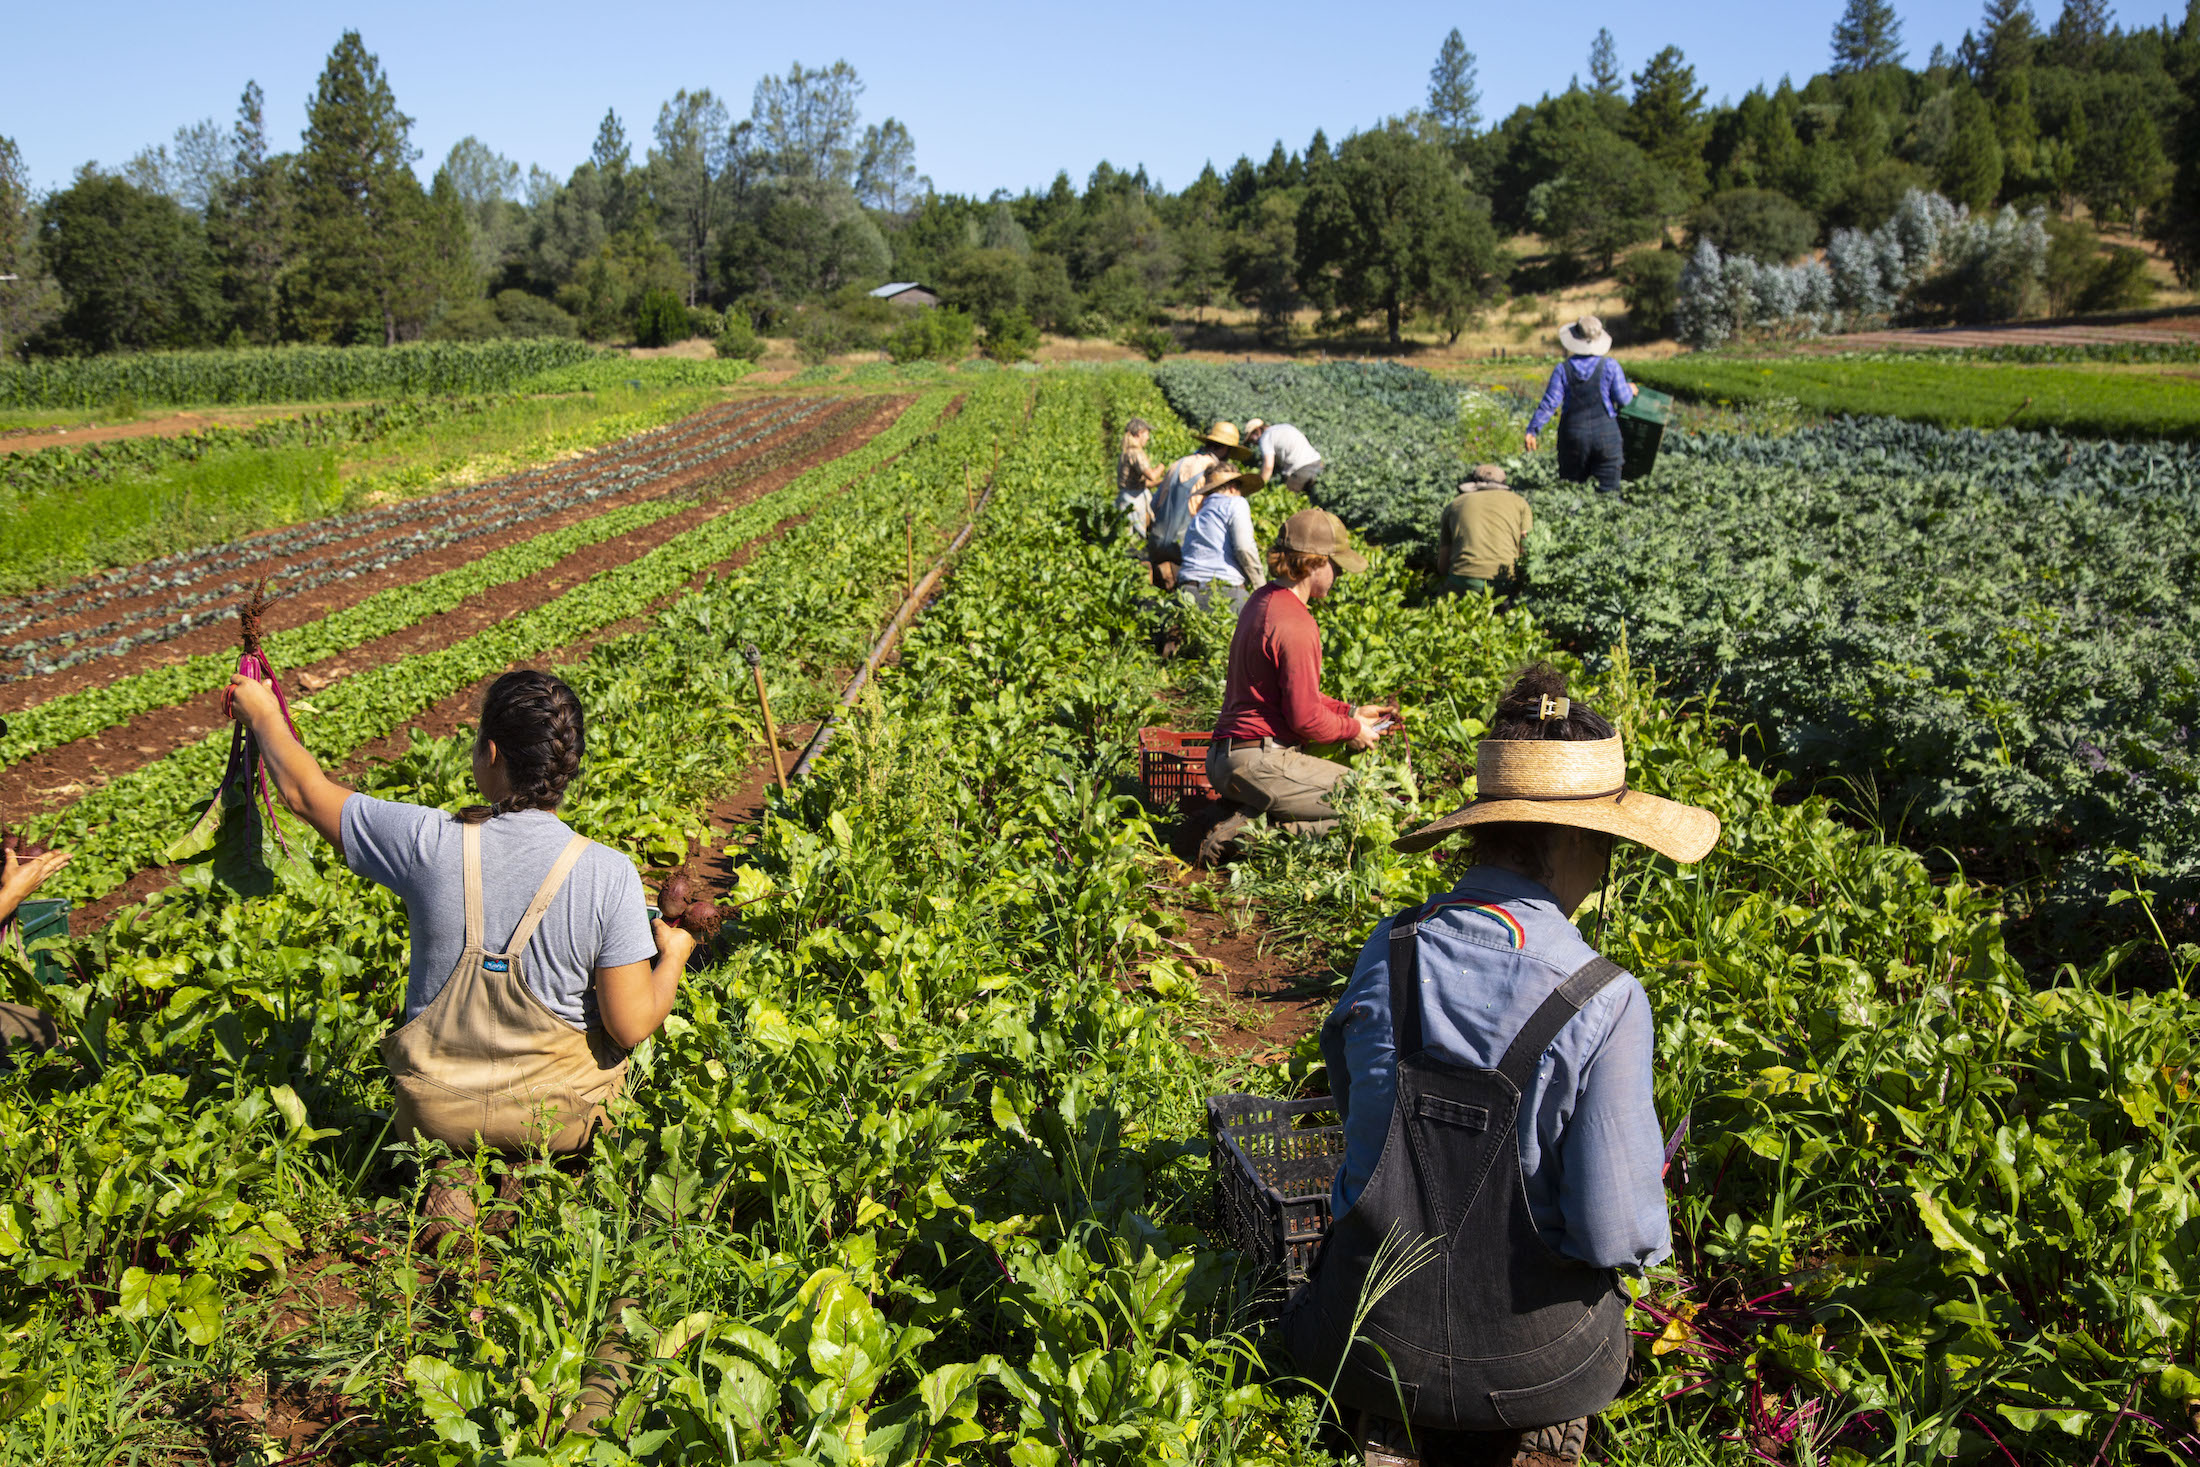 pickers on a farm collecting vegetables in Nevada County for Farmers Market